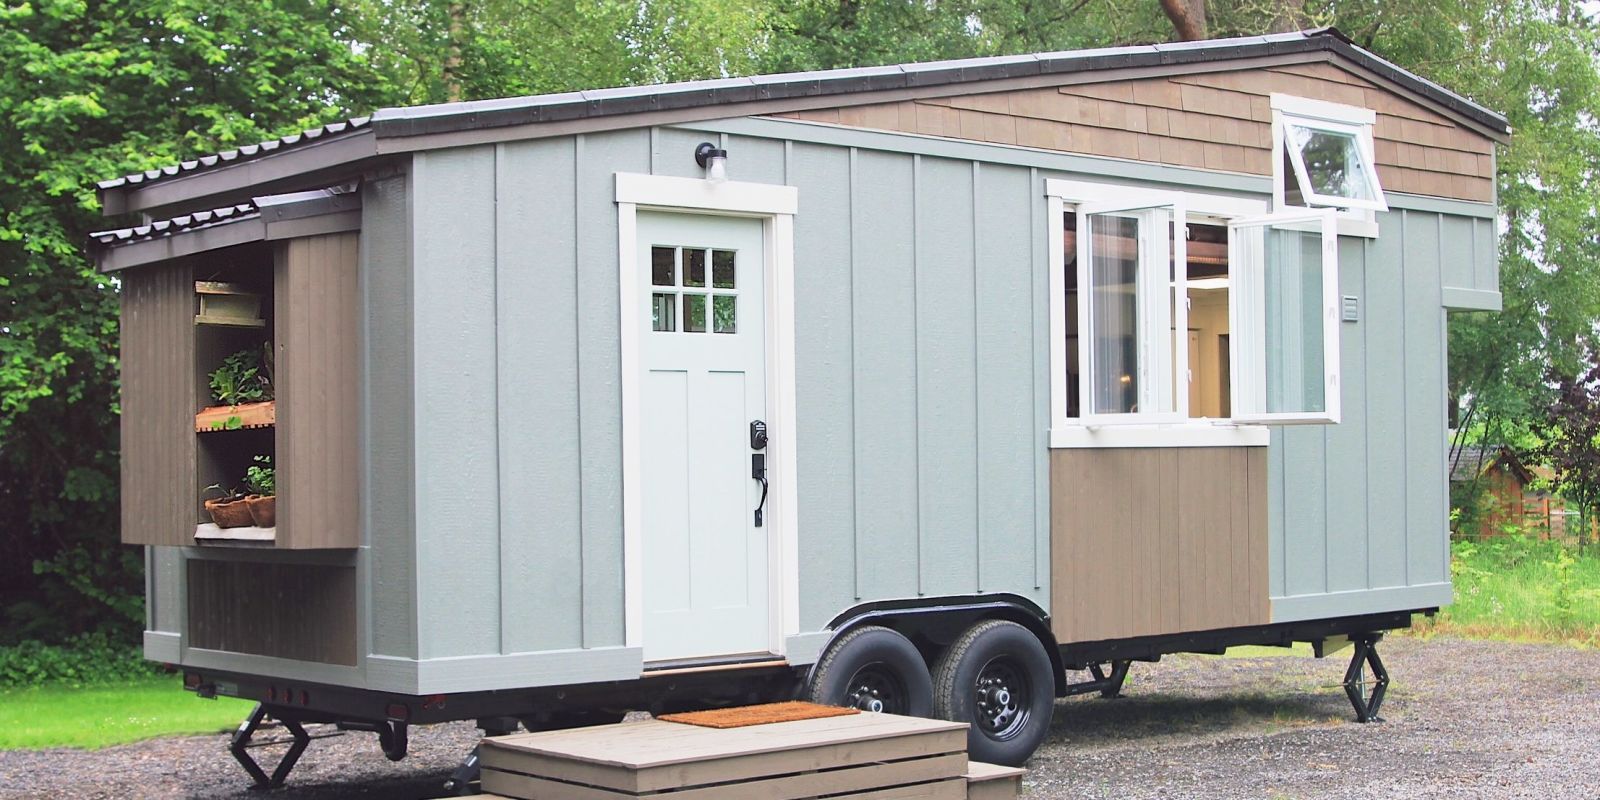 Tiny home on a trailer frame with an exterior that's grey with wood accents.